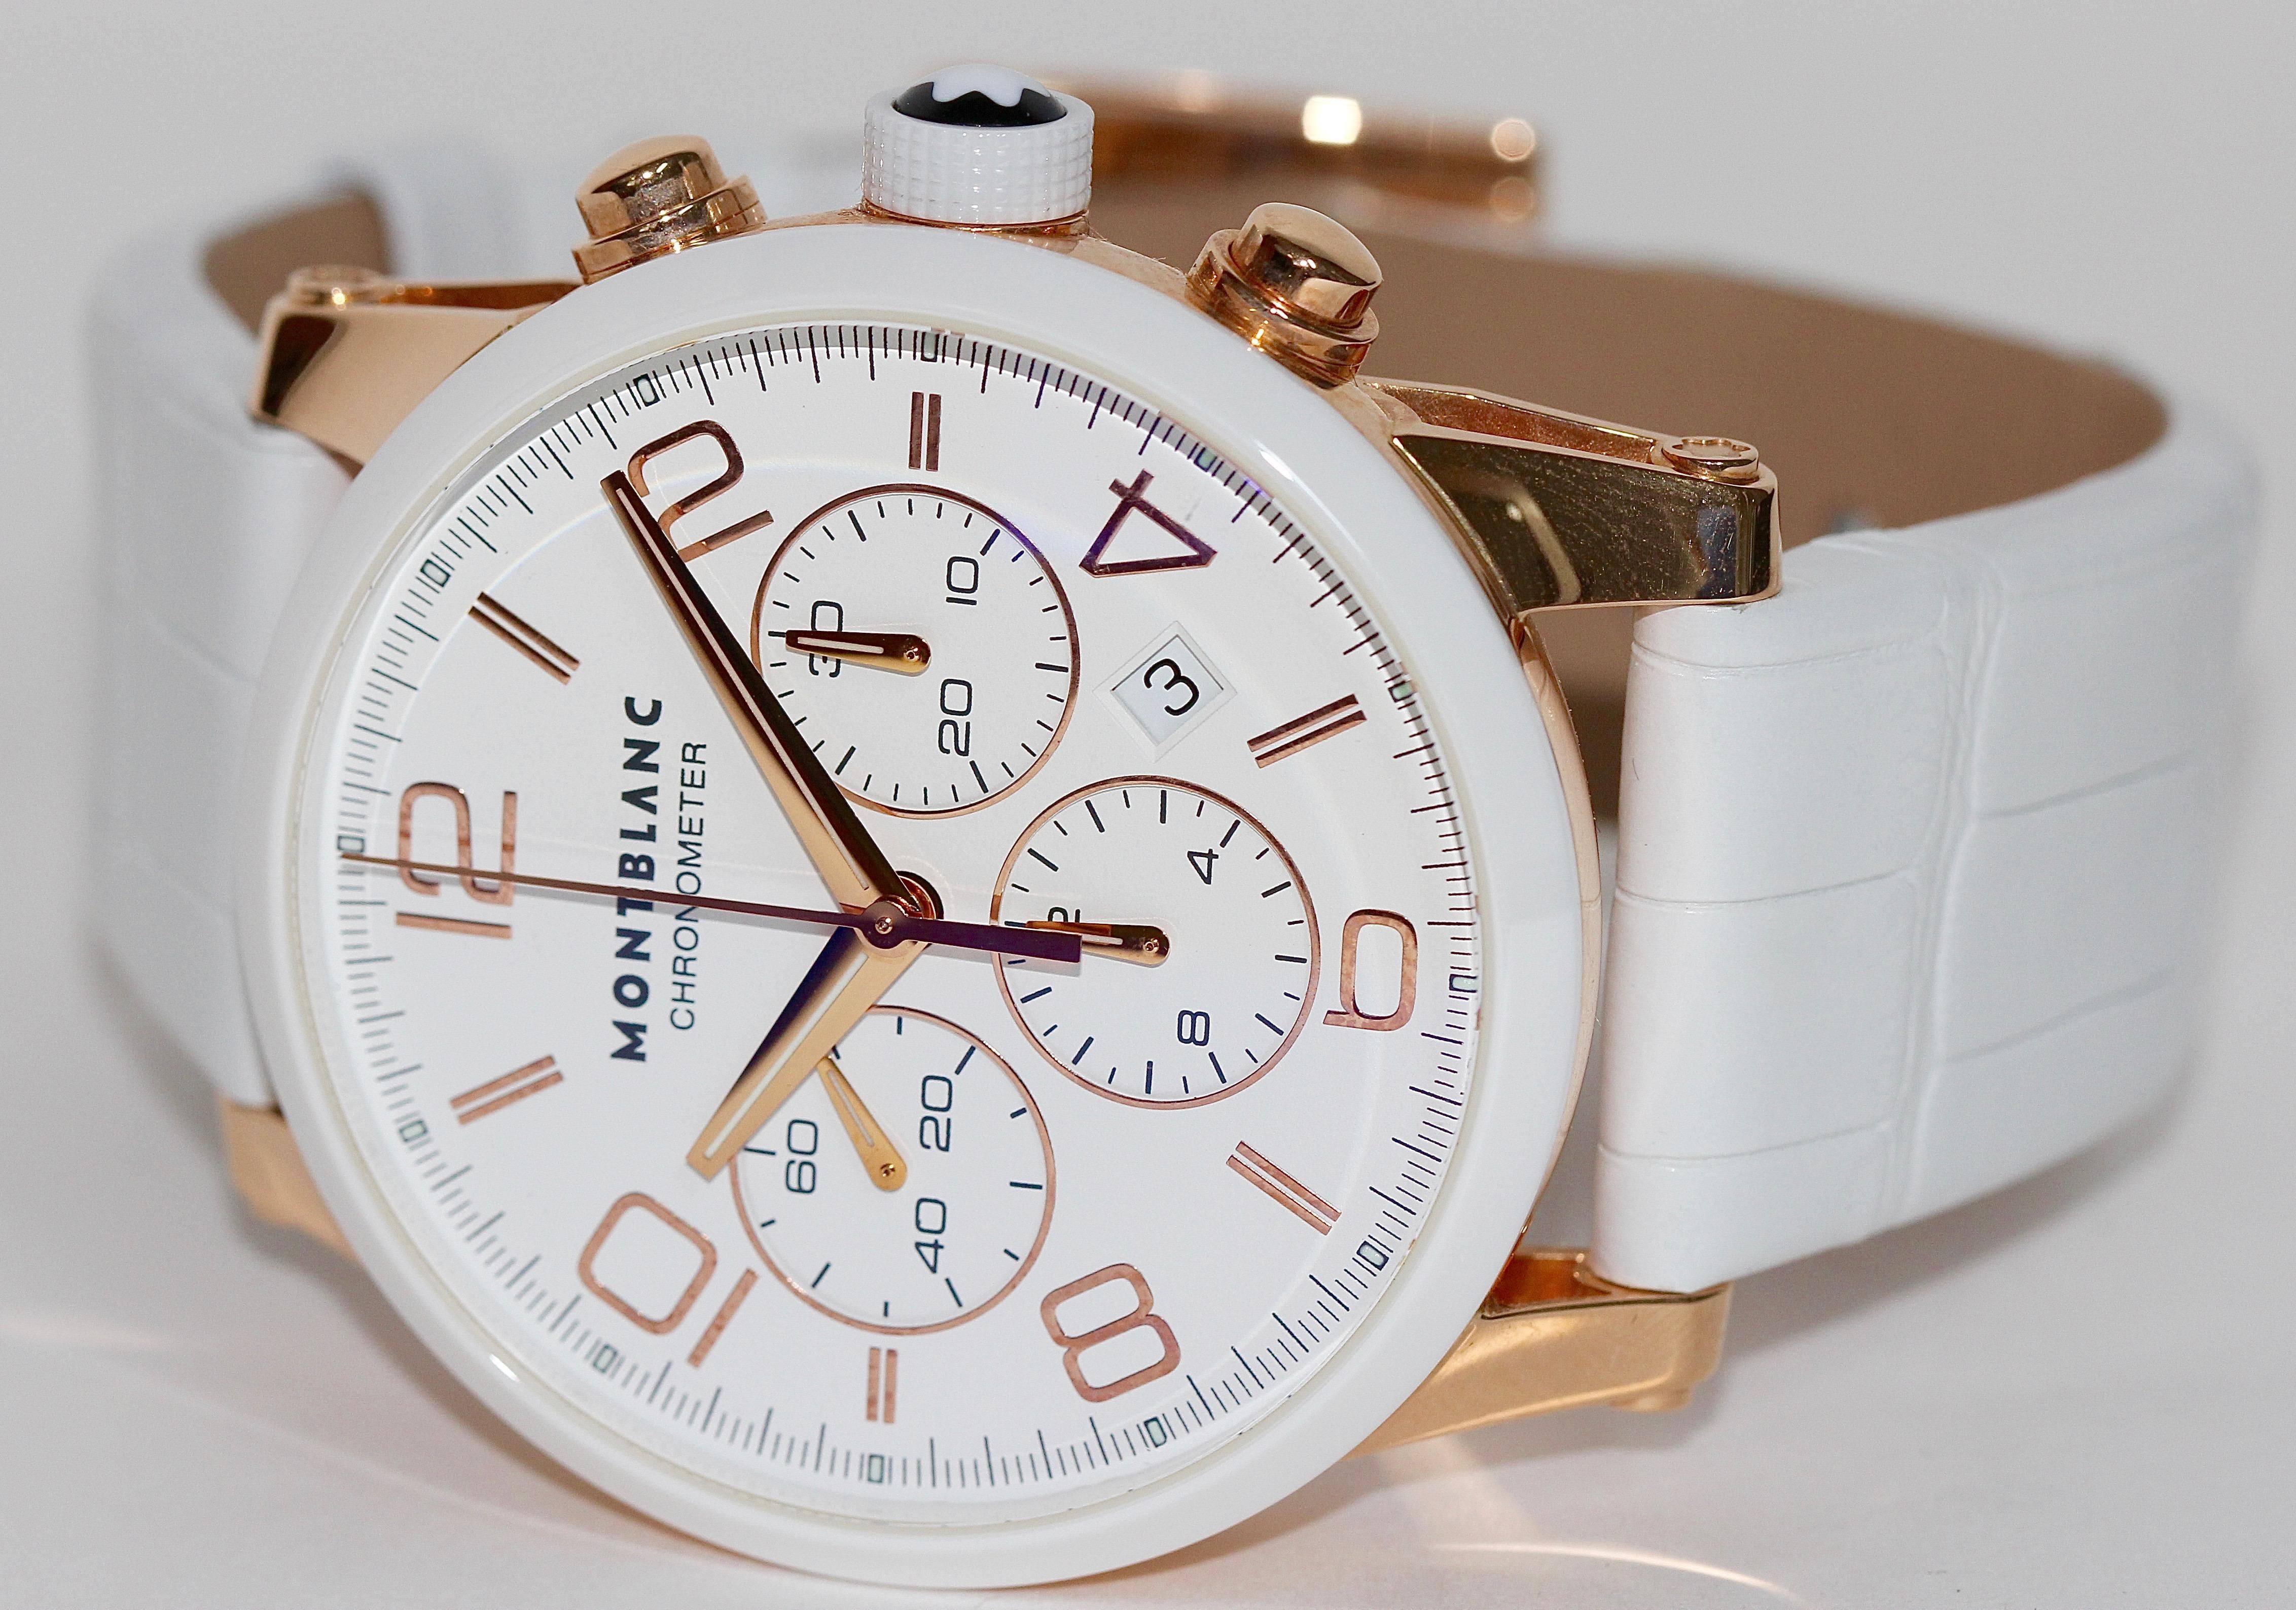 Luxurious eye catcher!

Montblanc 43mm Timewalker 18k Rose gold Chronograph Chronometer.

Clasp and case in 18k solid rose gold.

The watch comes with a certificate of authenticity.